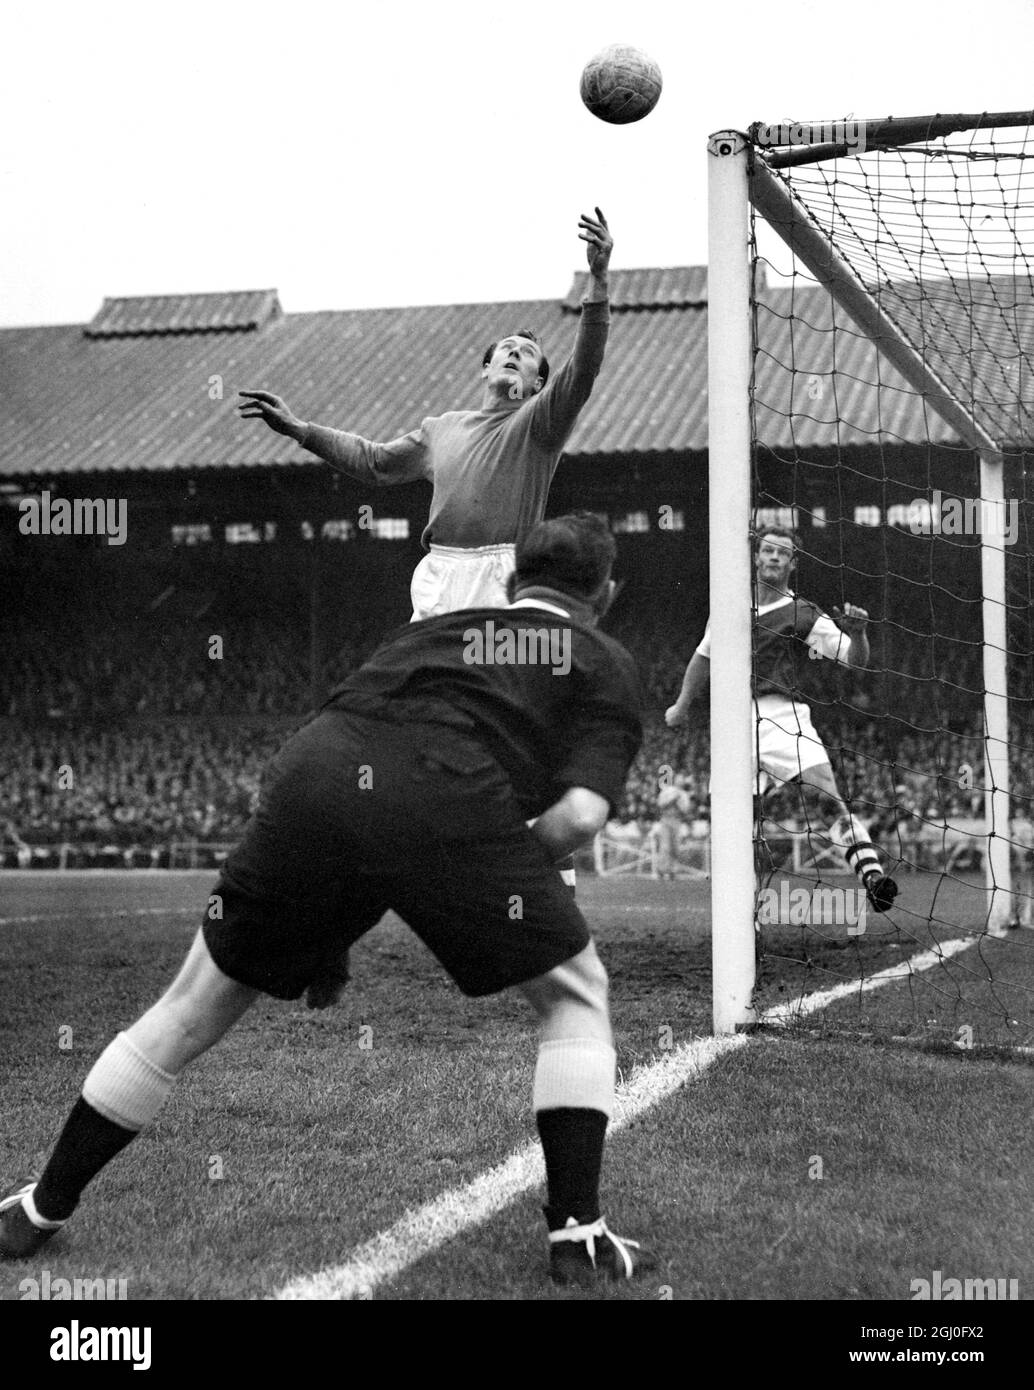 Chelsea v Arsenal Watched by referee Mr H Webb of Leeds, Jack Kelsey, the Arsenal goalkeeper makes a save during the match at Stamford Bridge. 26th October 1957 Stock Photo